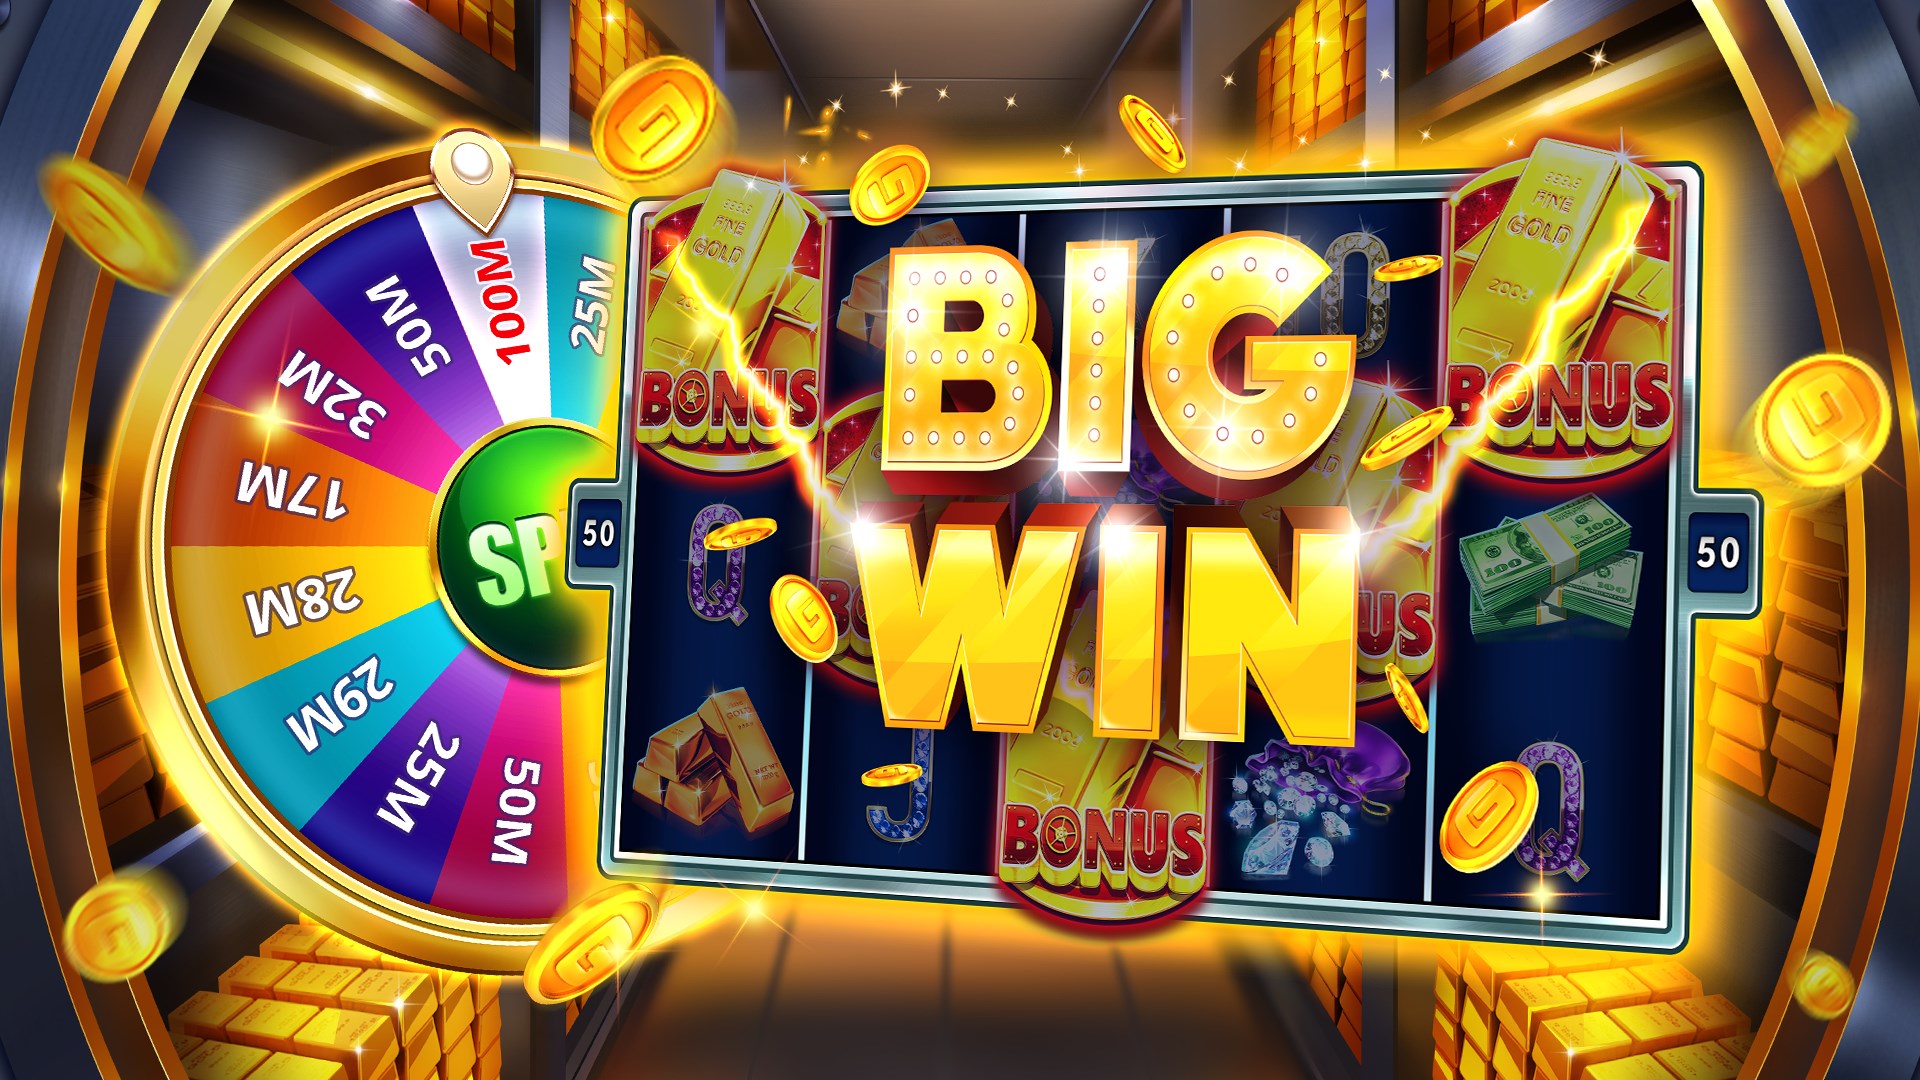 Review Game Cash Frenzy, Game Permainan Slot Online Buatan Spinx Games Limited